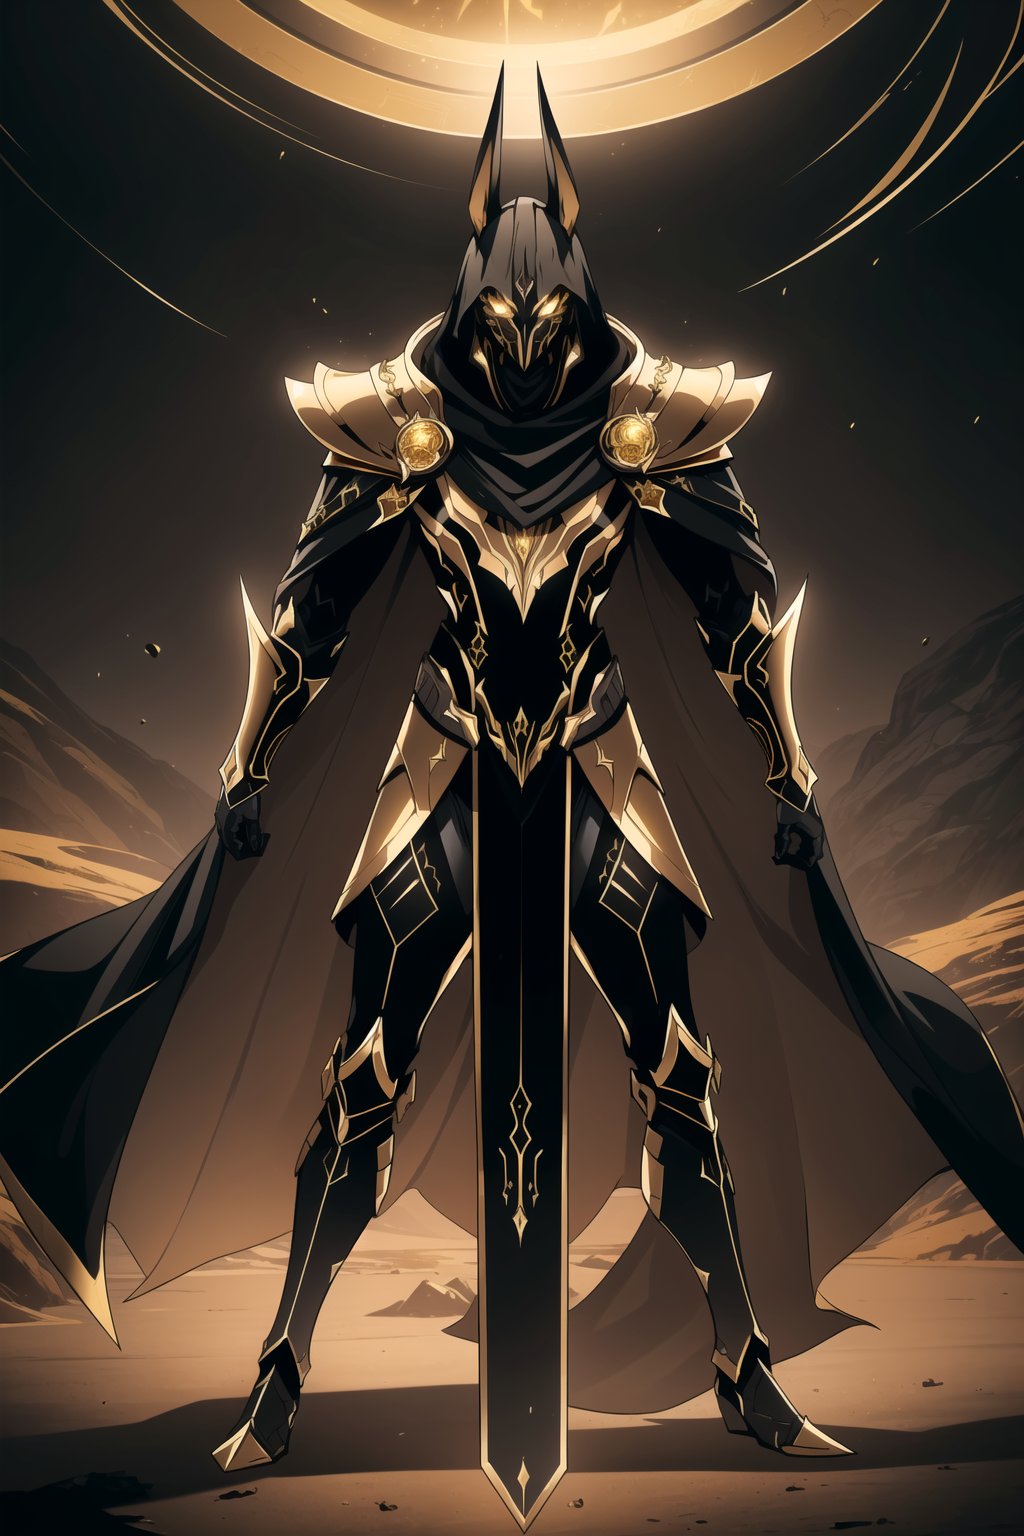 (Masterpiece, Best Quality), (Anubis Warrior in Warframe Style Armor), (Glowing Golden Eyes), (Wearing Black and Gold Anubis-Themed Armor and Black Flowing Cloak:1.4), (Barren Desert at Noon:1.2), (Action Pose:1.4), Centered, (Half Body Shot:1.4), (From Front Shot:1.2), Insane Details, Intricate Face Detail, Intricate Hand Details, Cinematic Shot and Lighting, Realistic and Vibrant Colors, Sharp Focus, Ultra Detailed, Realistic Images, Depth of Field, Incredibly Realistic Environment and Scene, Master Composition and Cinematography, castlevania style,castlevania style,WARFRAME